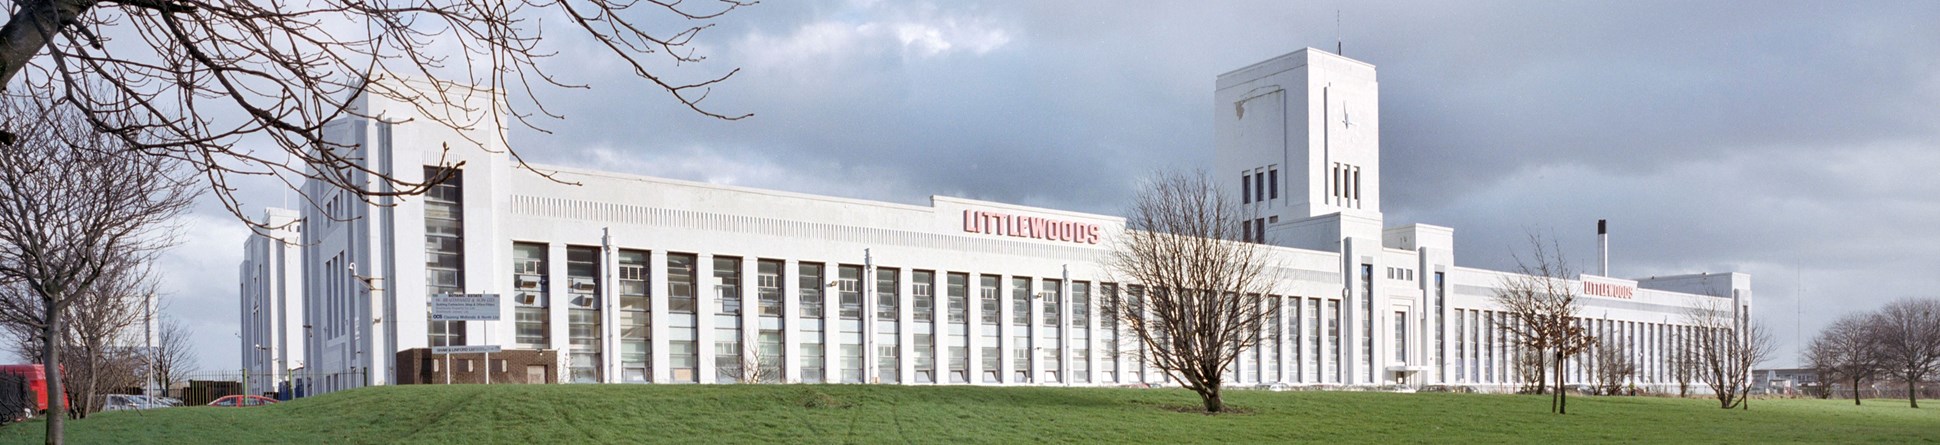 The front of the Littlewoods Pools building photographed in 2002.